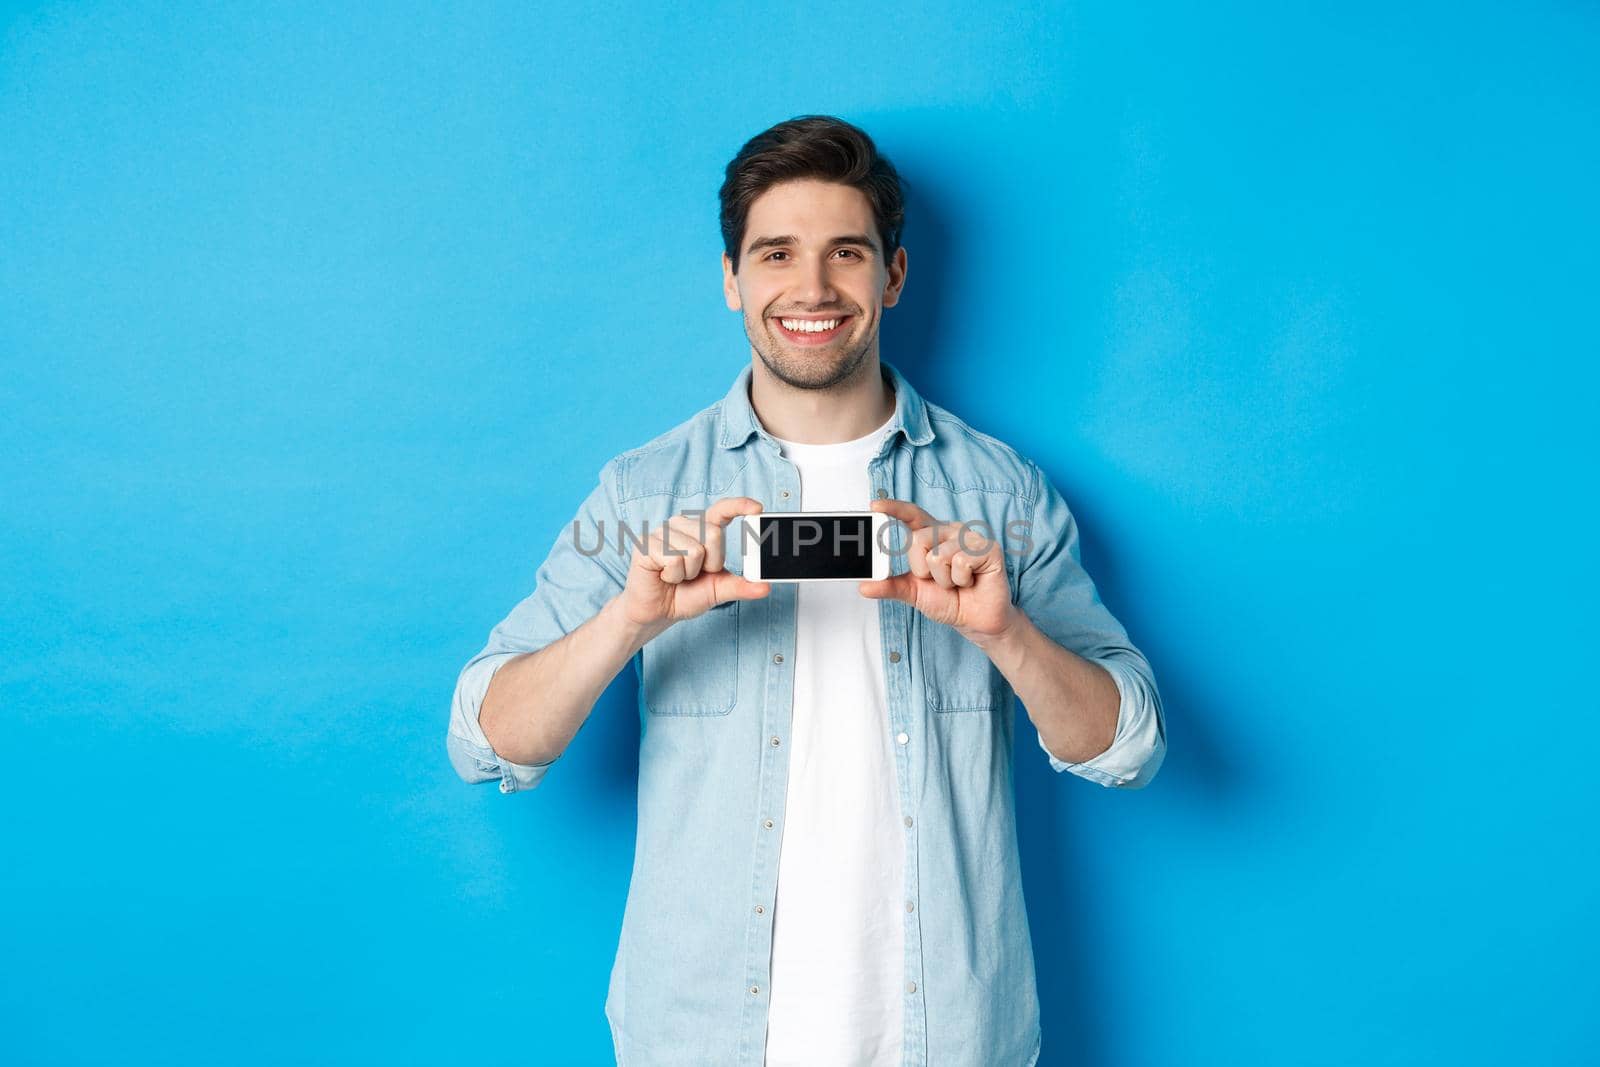 Handsome smiling man showing smartphone screen, standing against blue background for copy space.